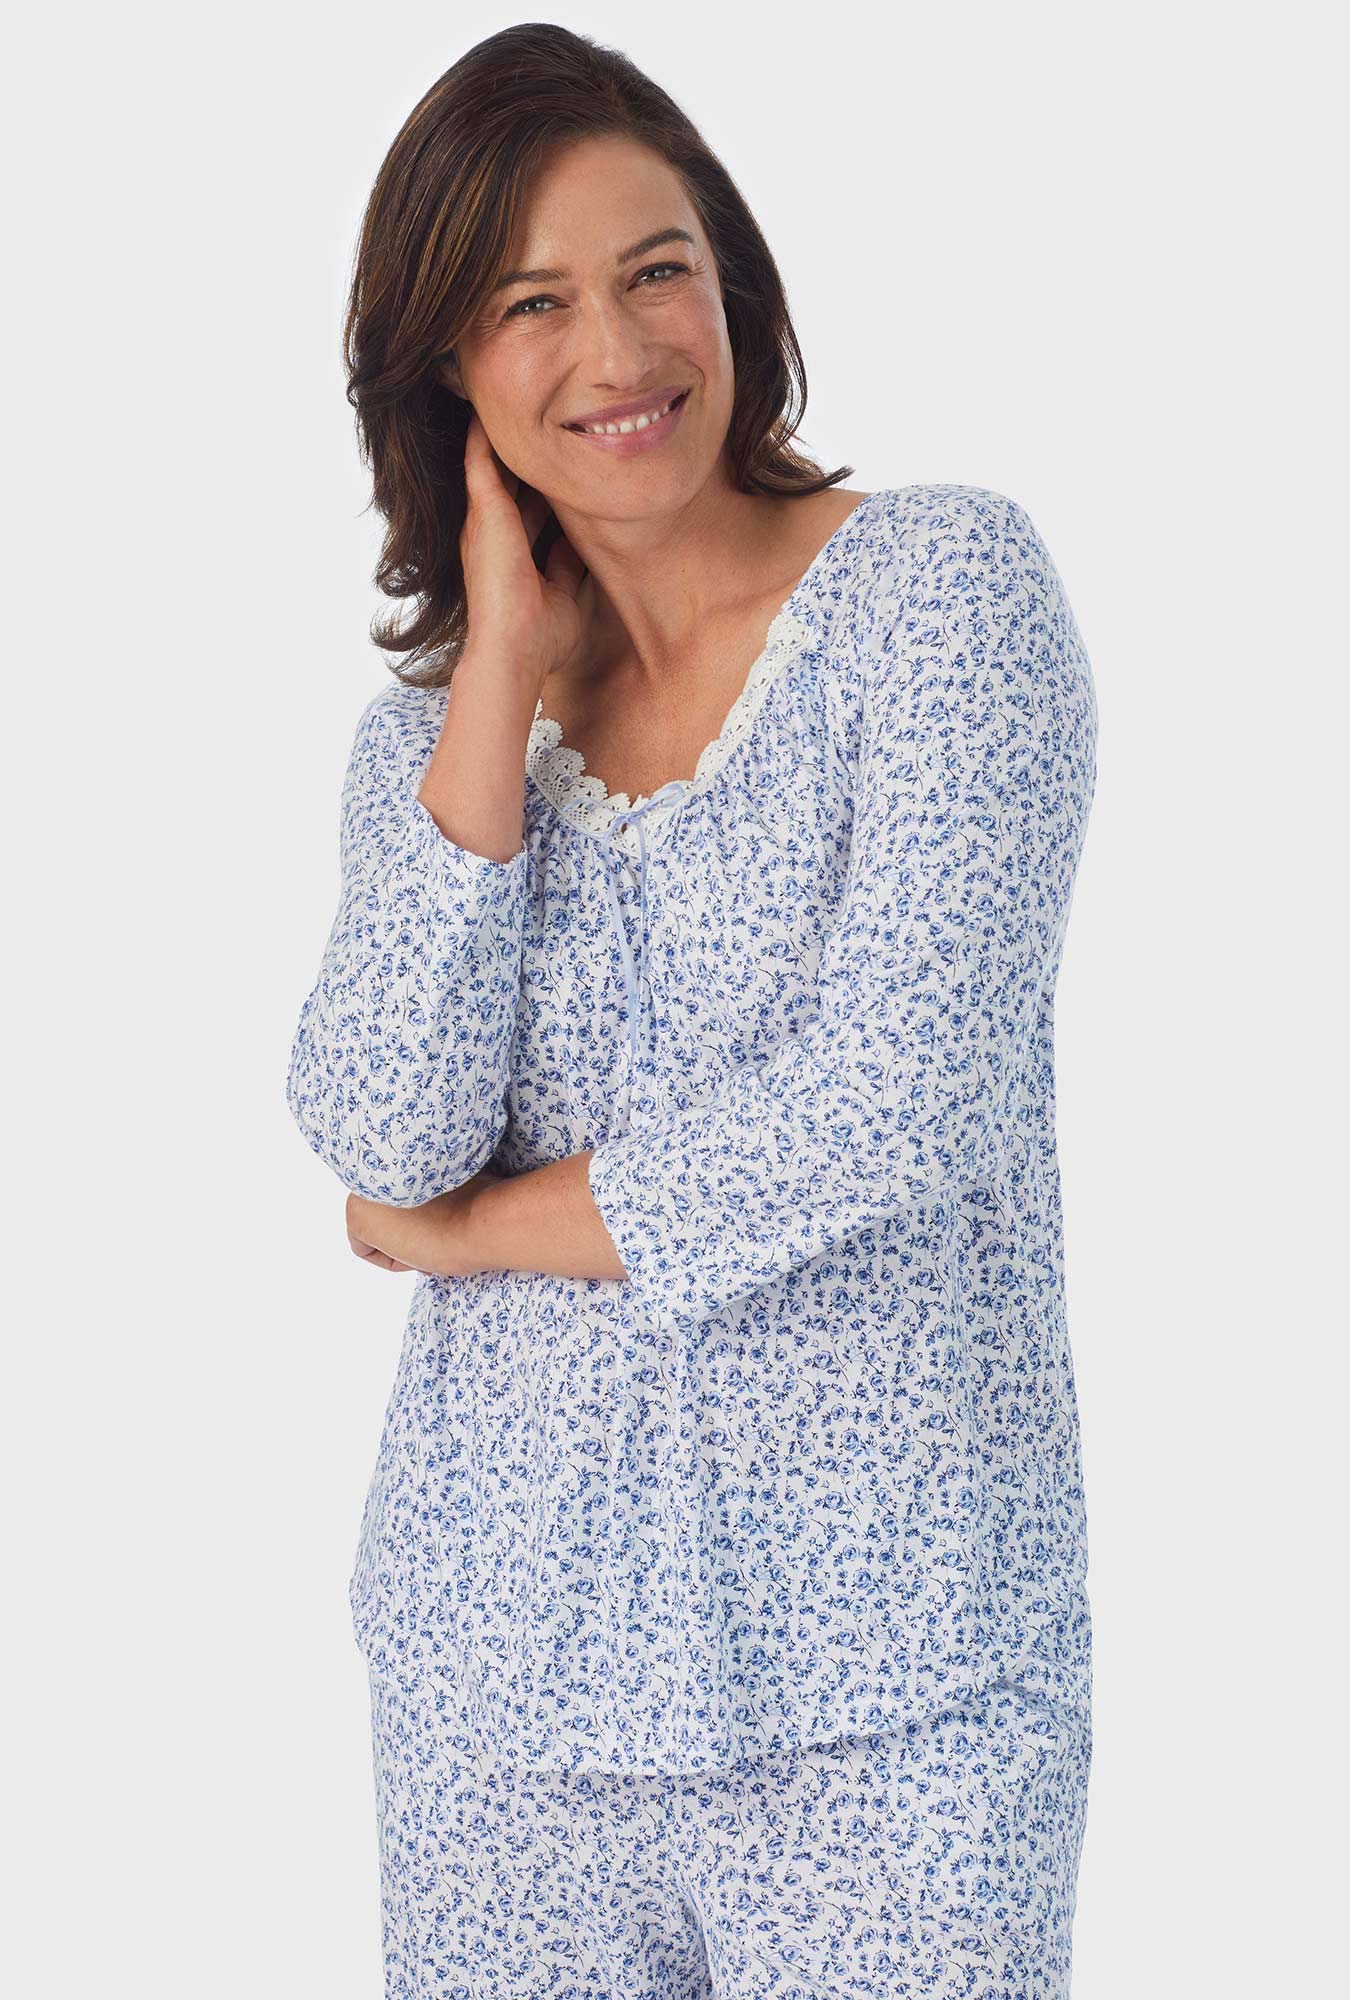 A lady wearing white Long Sleeve 3/4 Sleeve Long Pant PJ Set with Dusty Blue  print